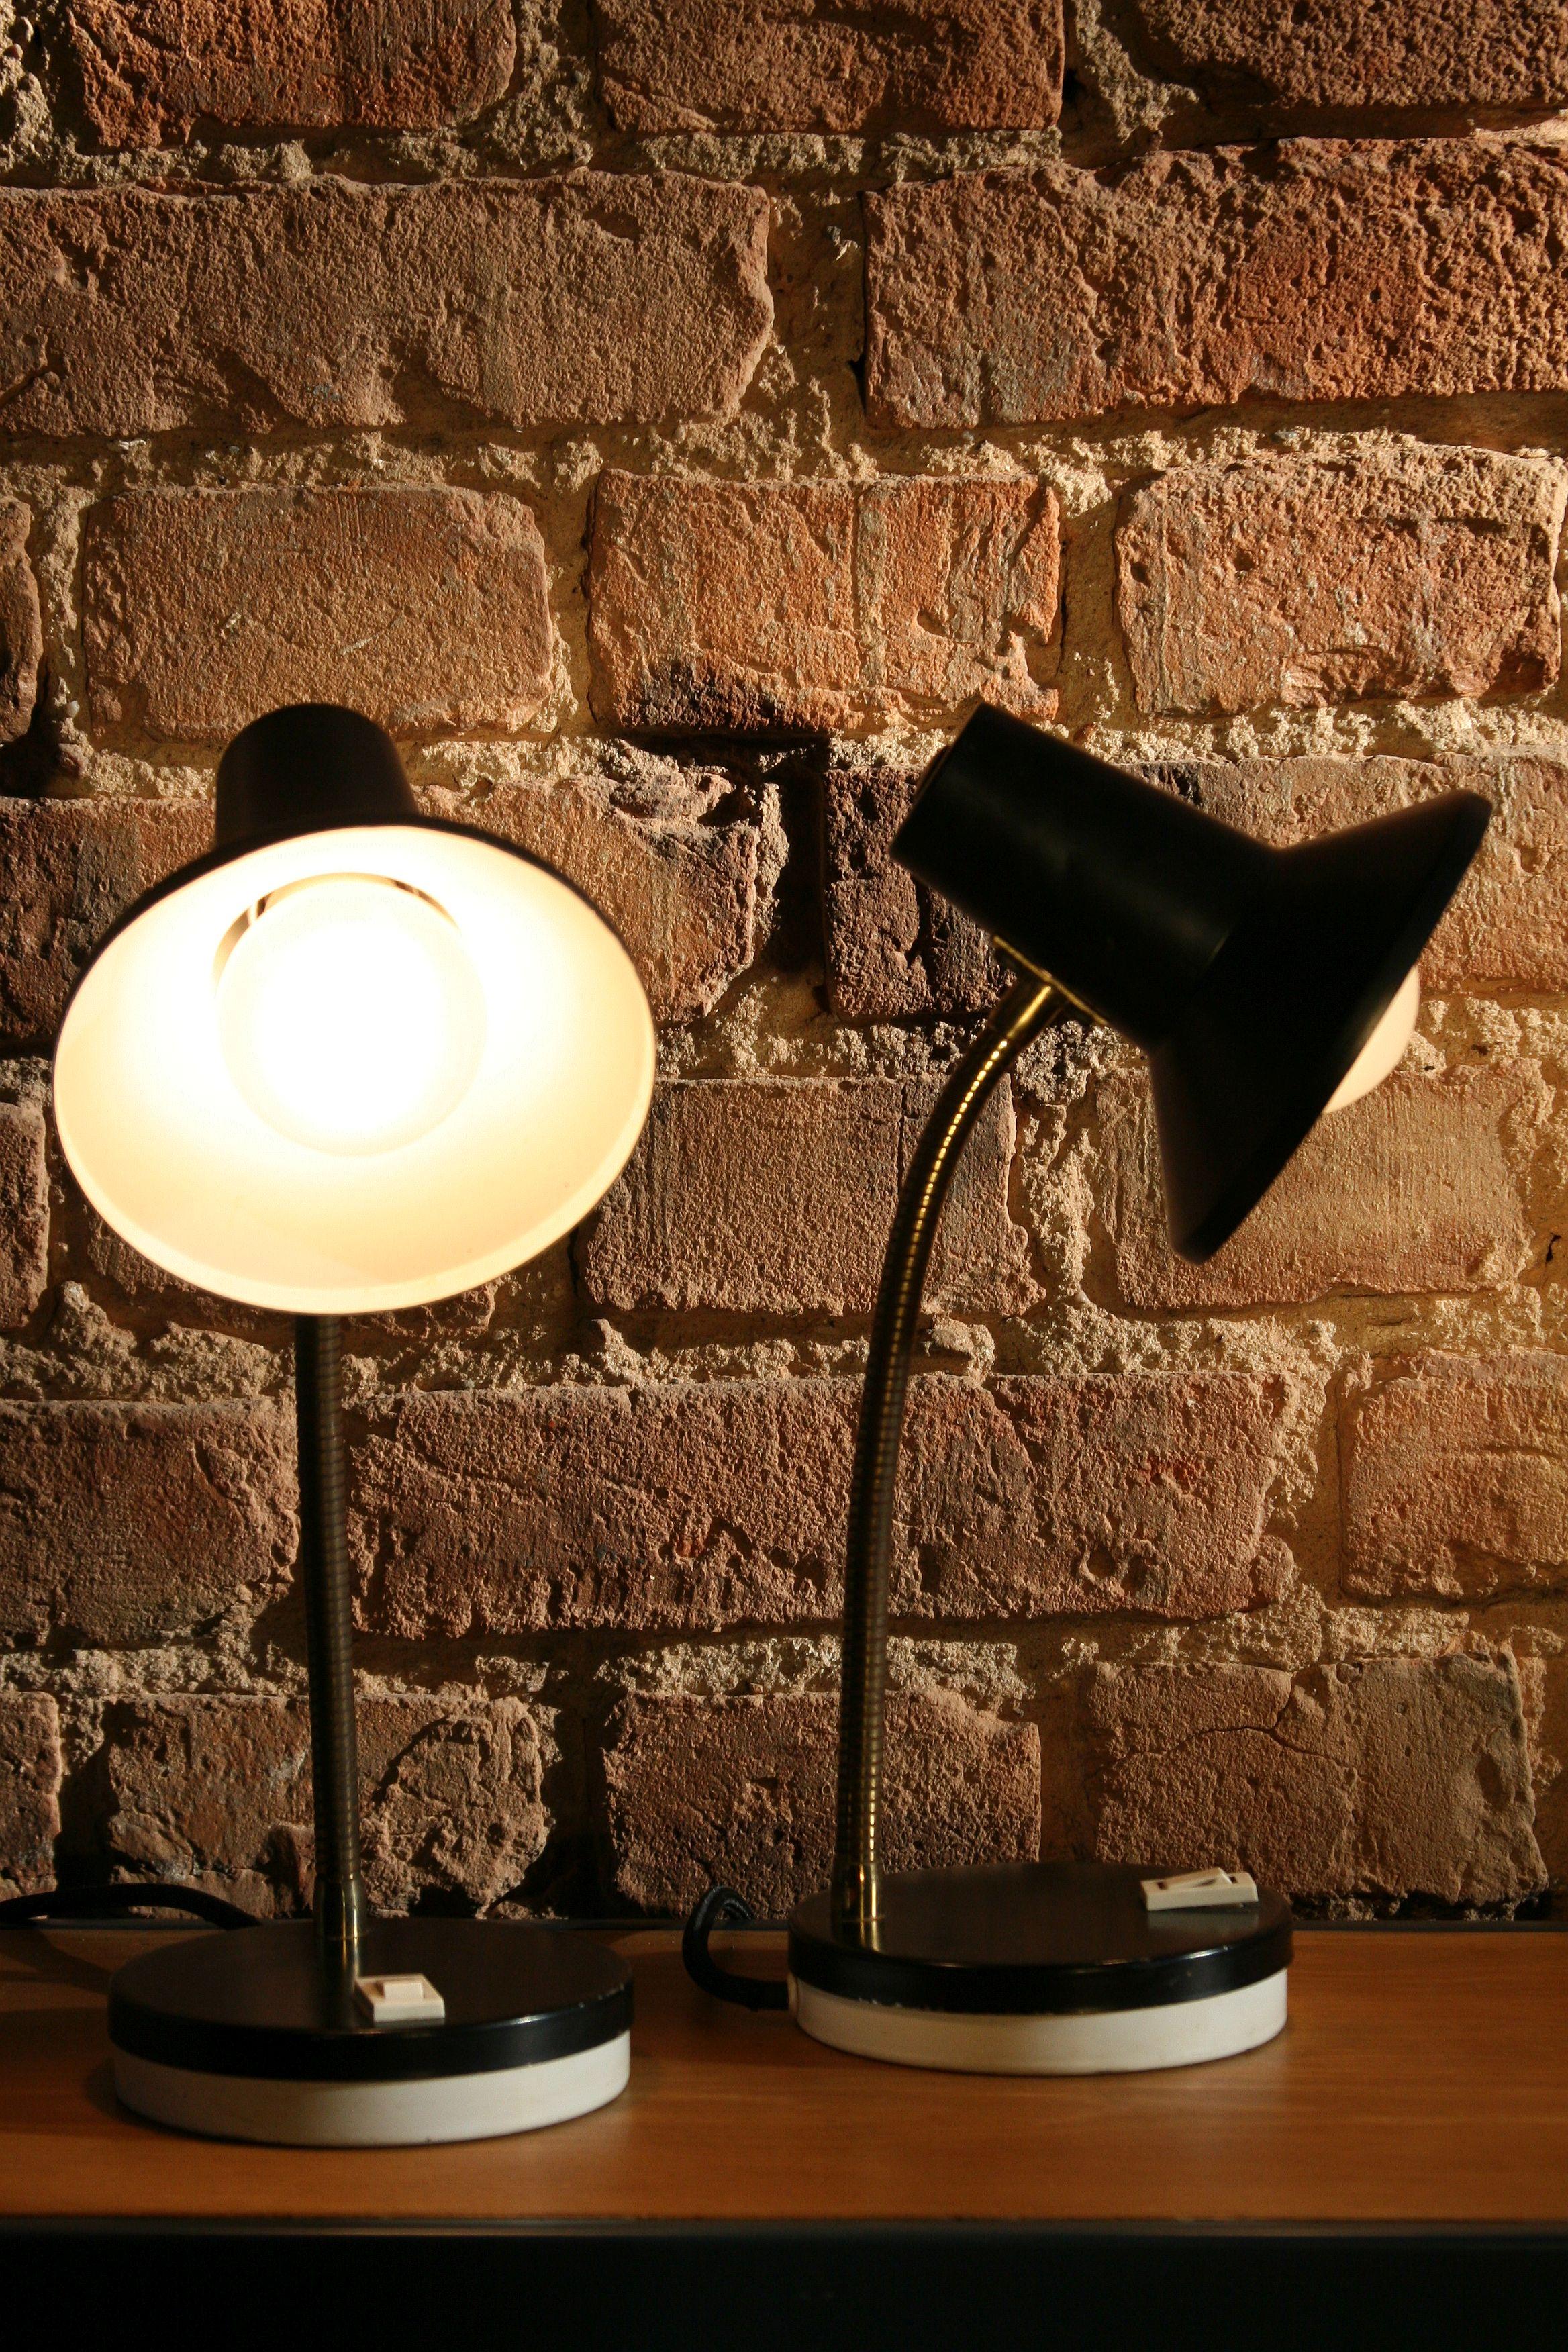 Modern design, two pieces of table lamps produced in Germany in the 1970s.

Construction:
The base and the lampshade are made of pressed steel sheet and covered with an original black and white varnish. The arm of the lamp is made of an elastic